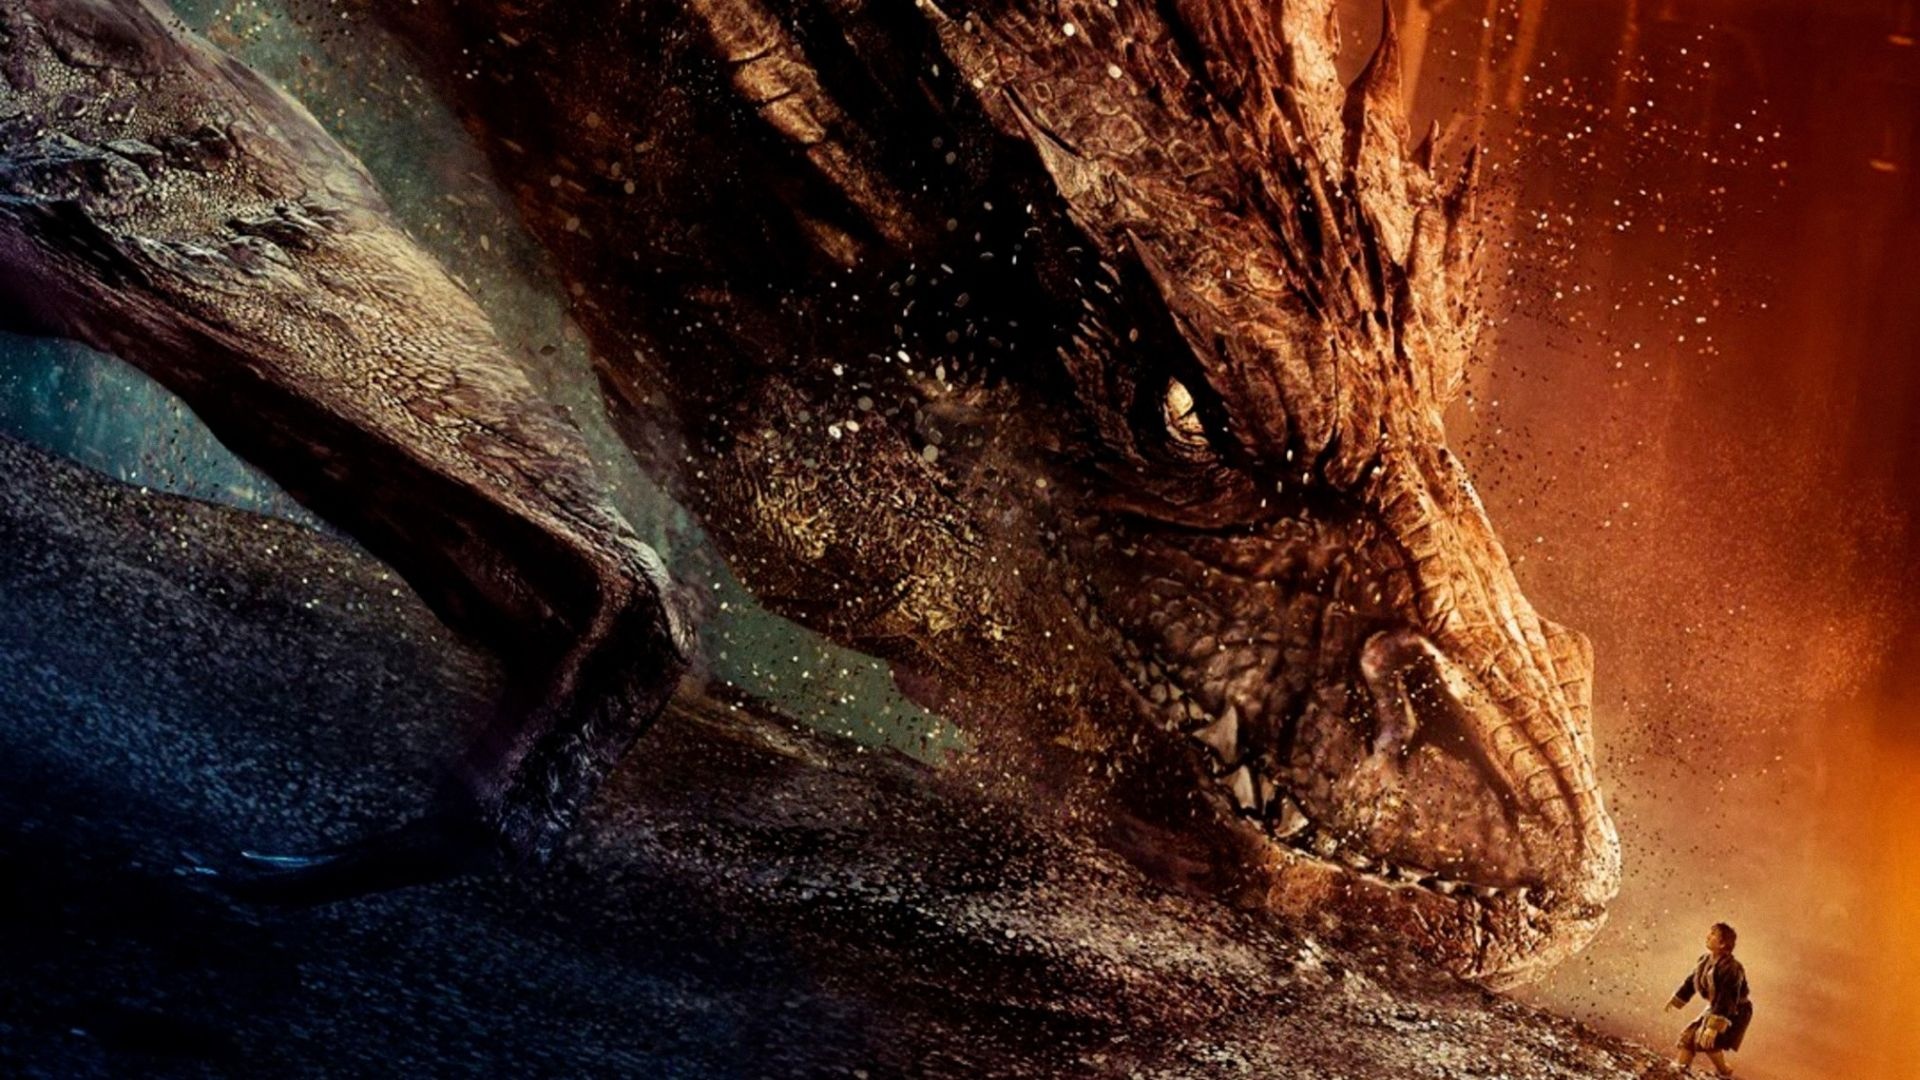 The Hobbit (Movie): Smaug, Dragon who invaded the Dwarf kingdom of Erebor. 1920x1080 Full HD Background.